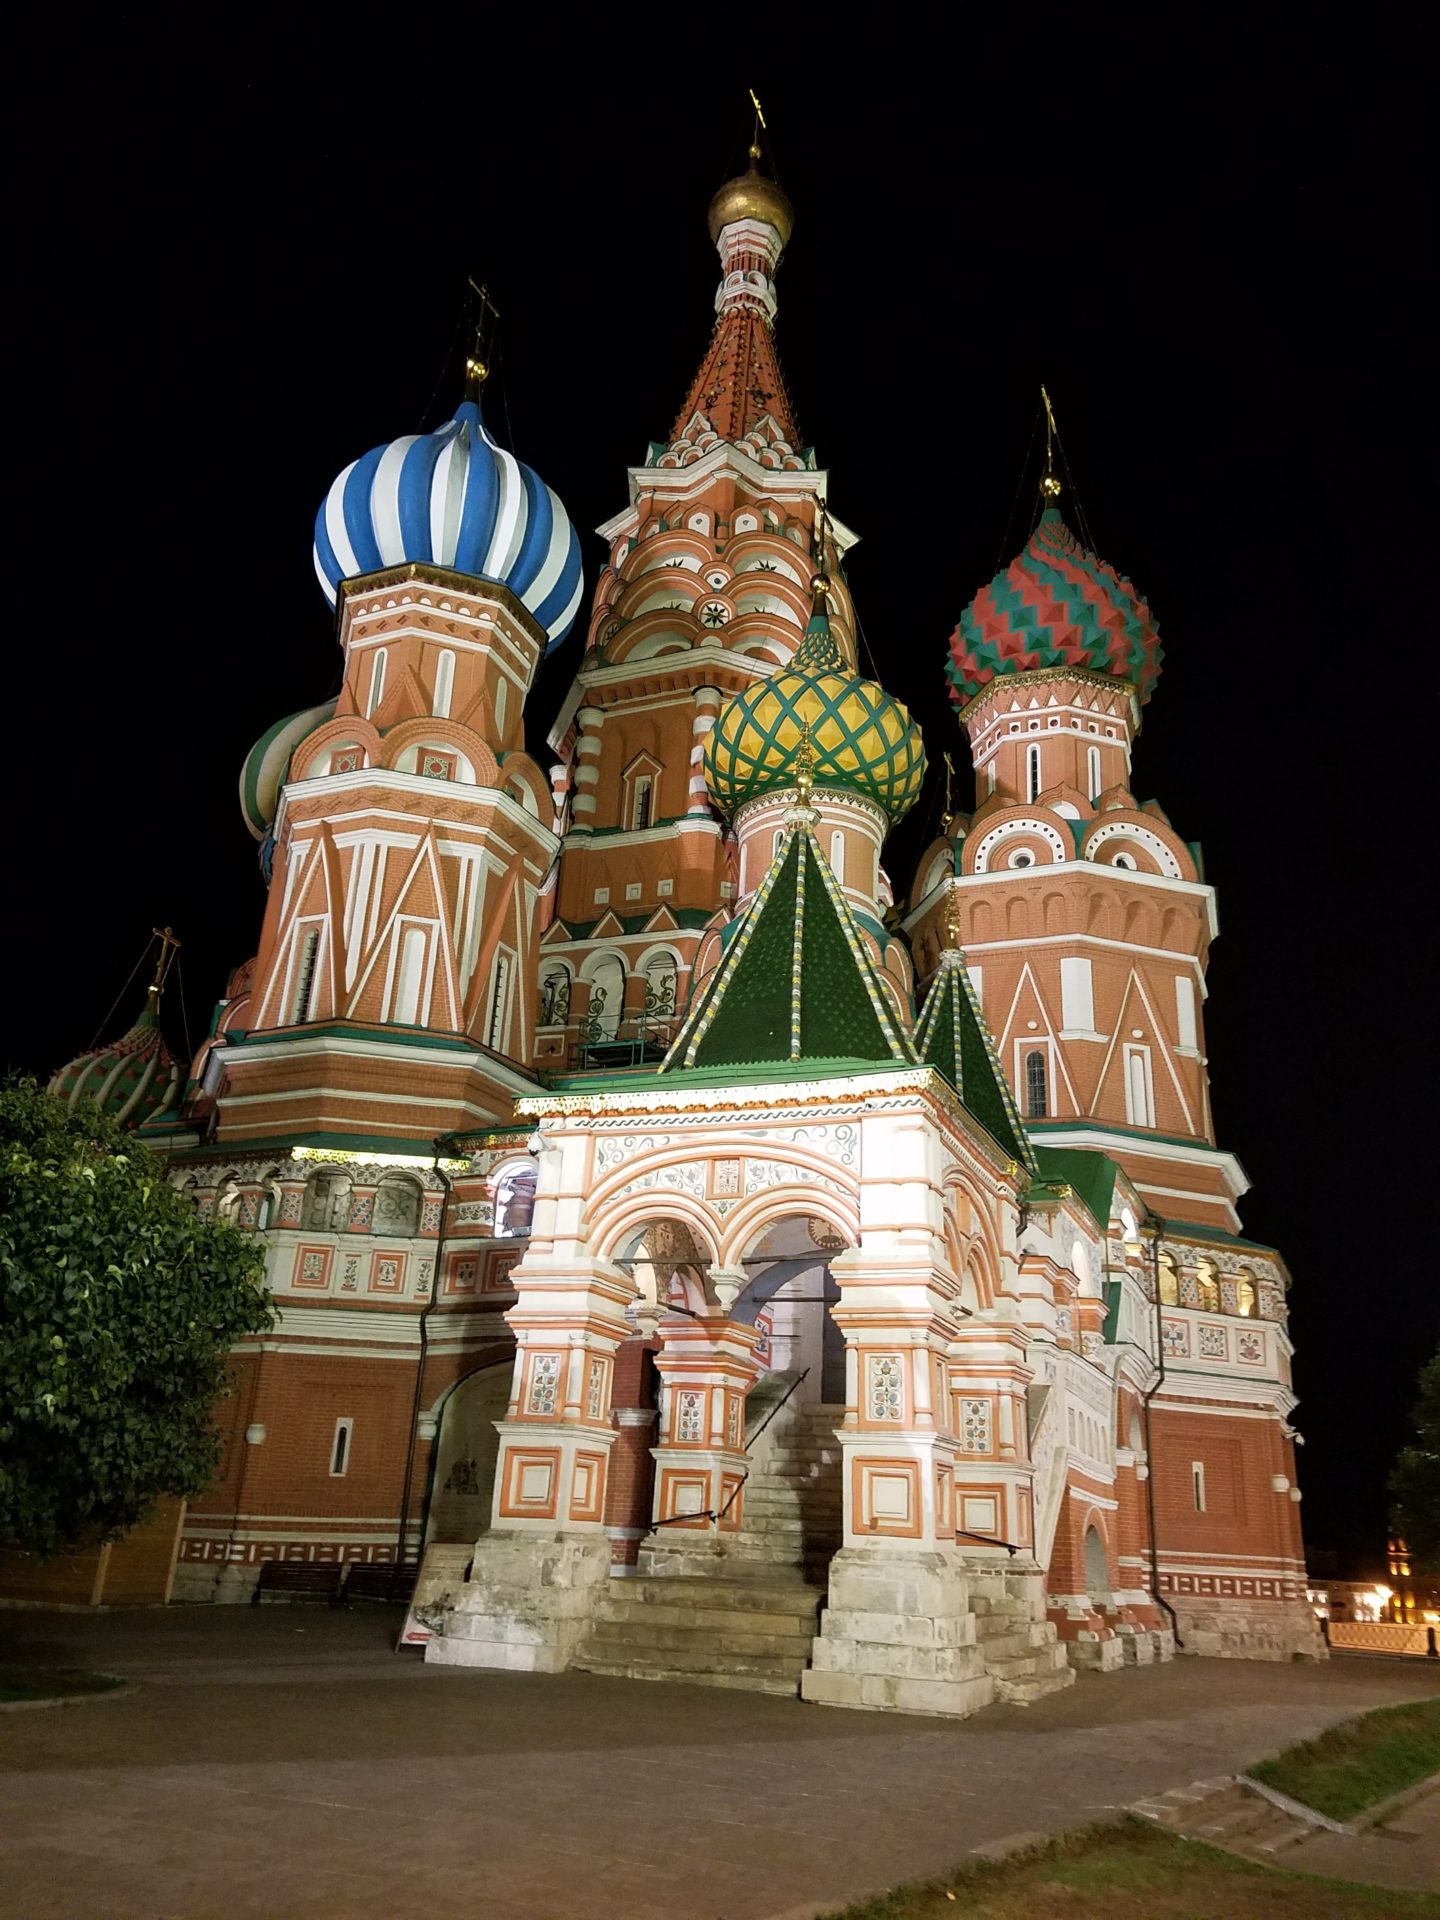 a building with colorful domes at night